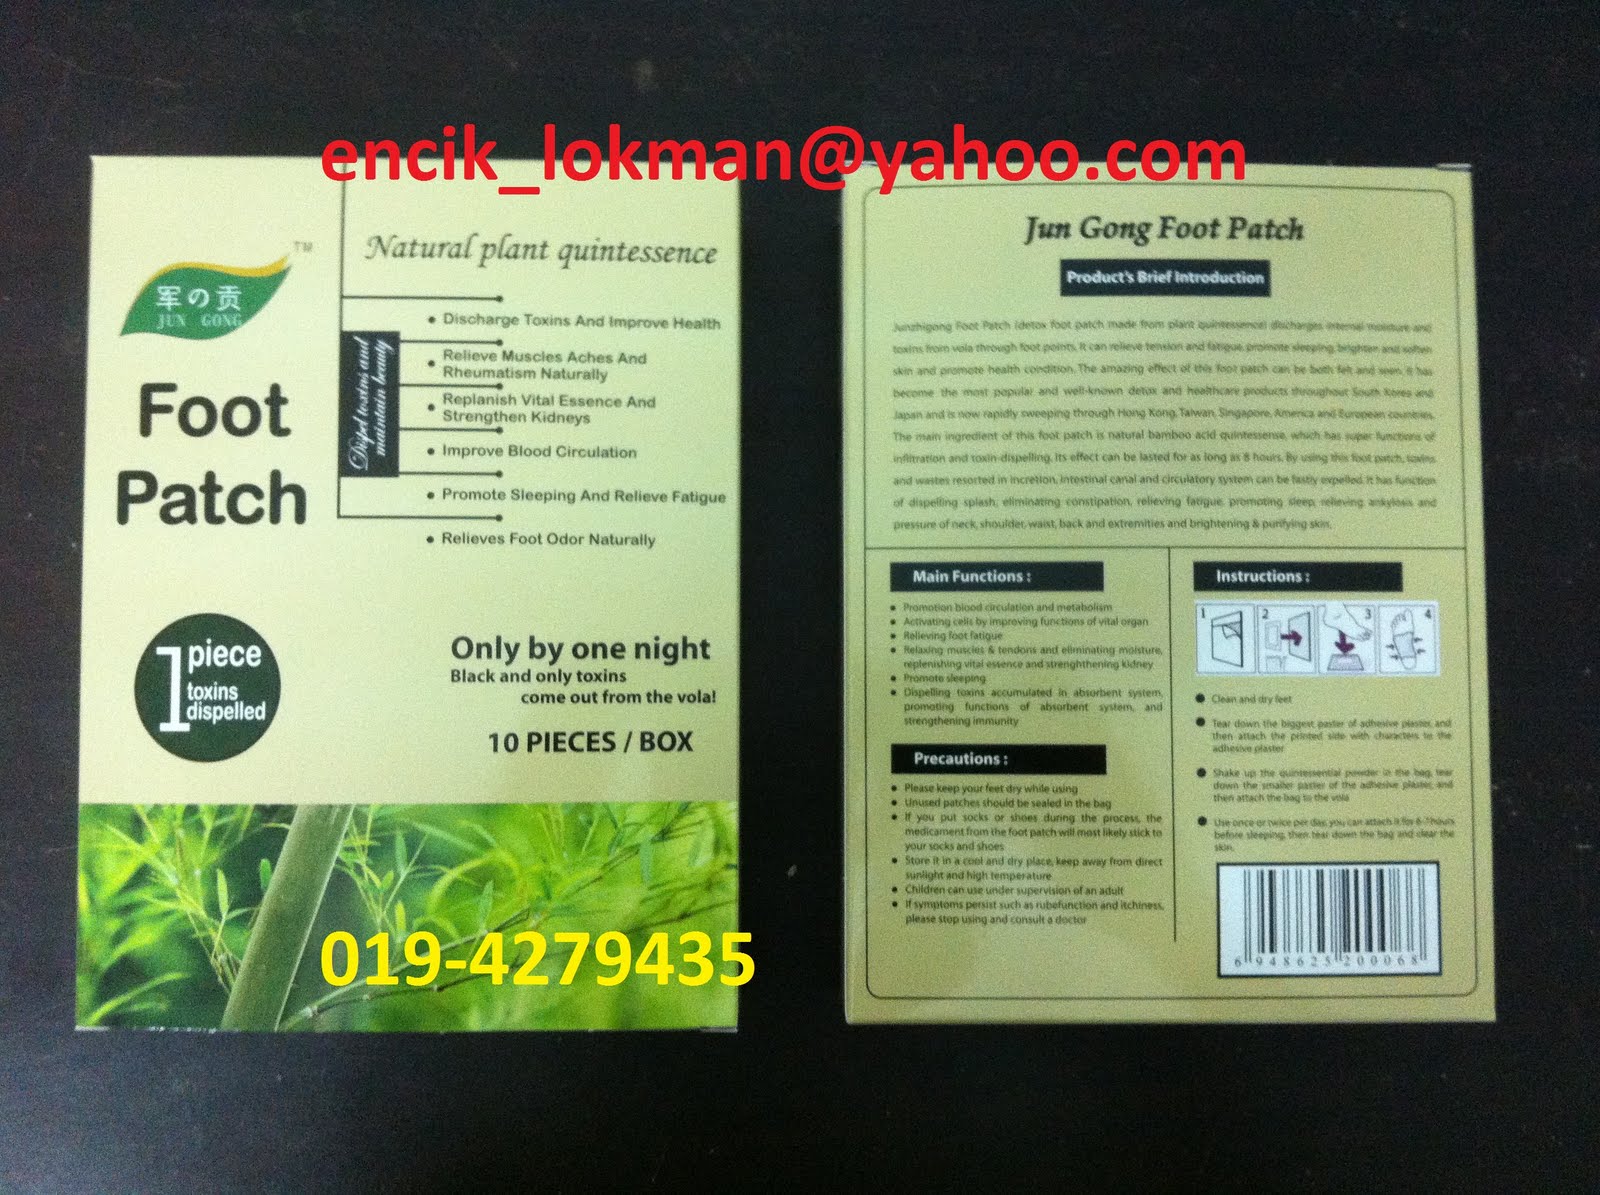 Detox Slimming Gold Foot Patch